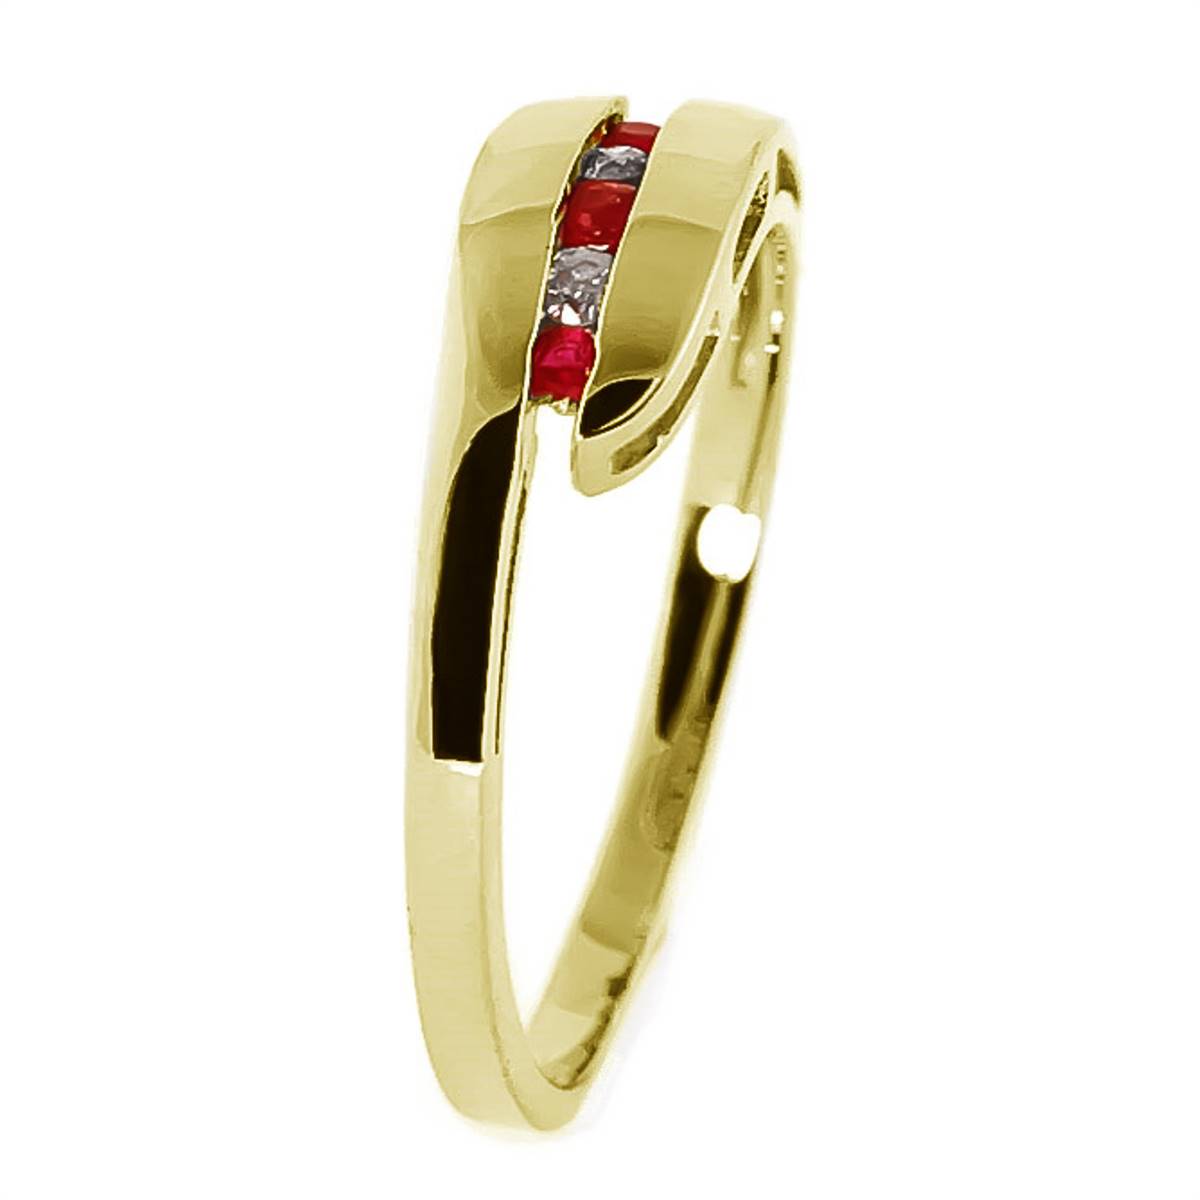 0.25 Carat 14K Solid Yellow Gold Ring Channel Set Diamond Ruby